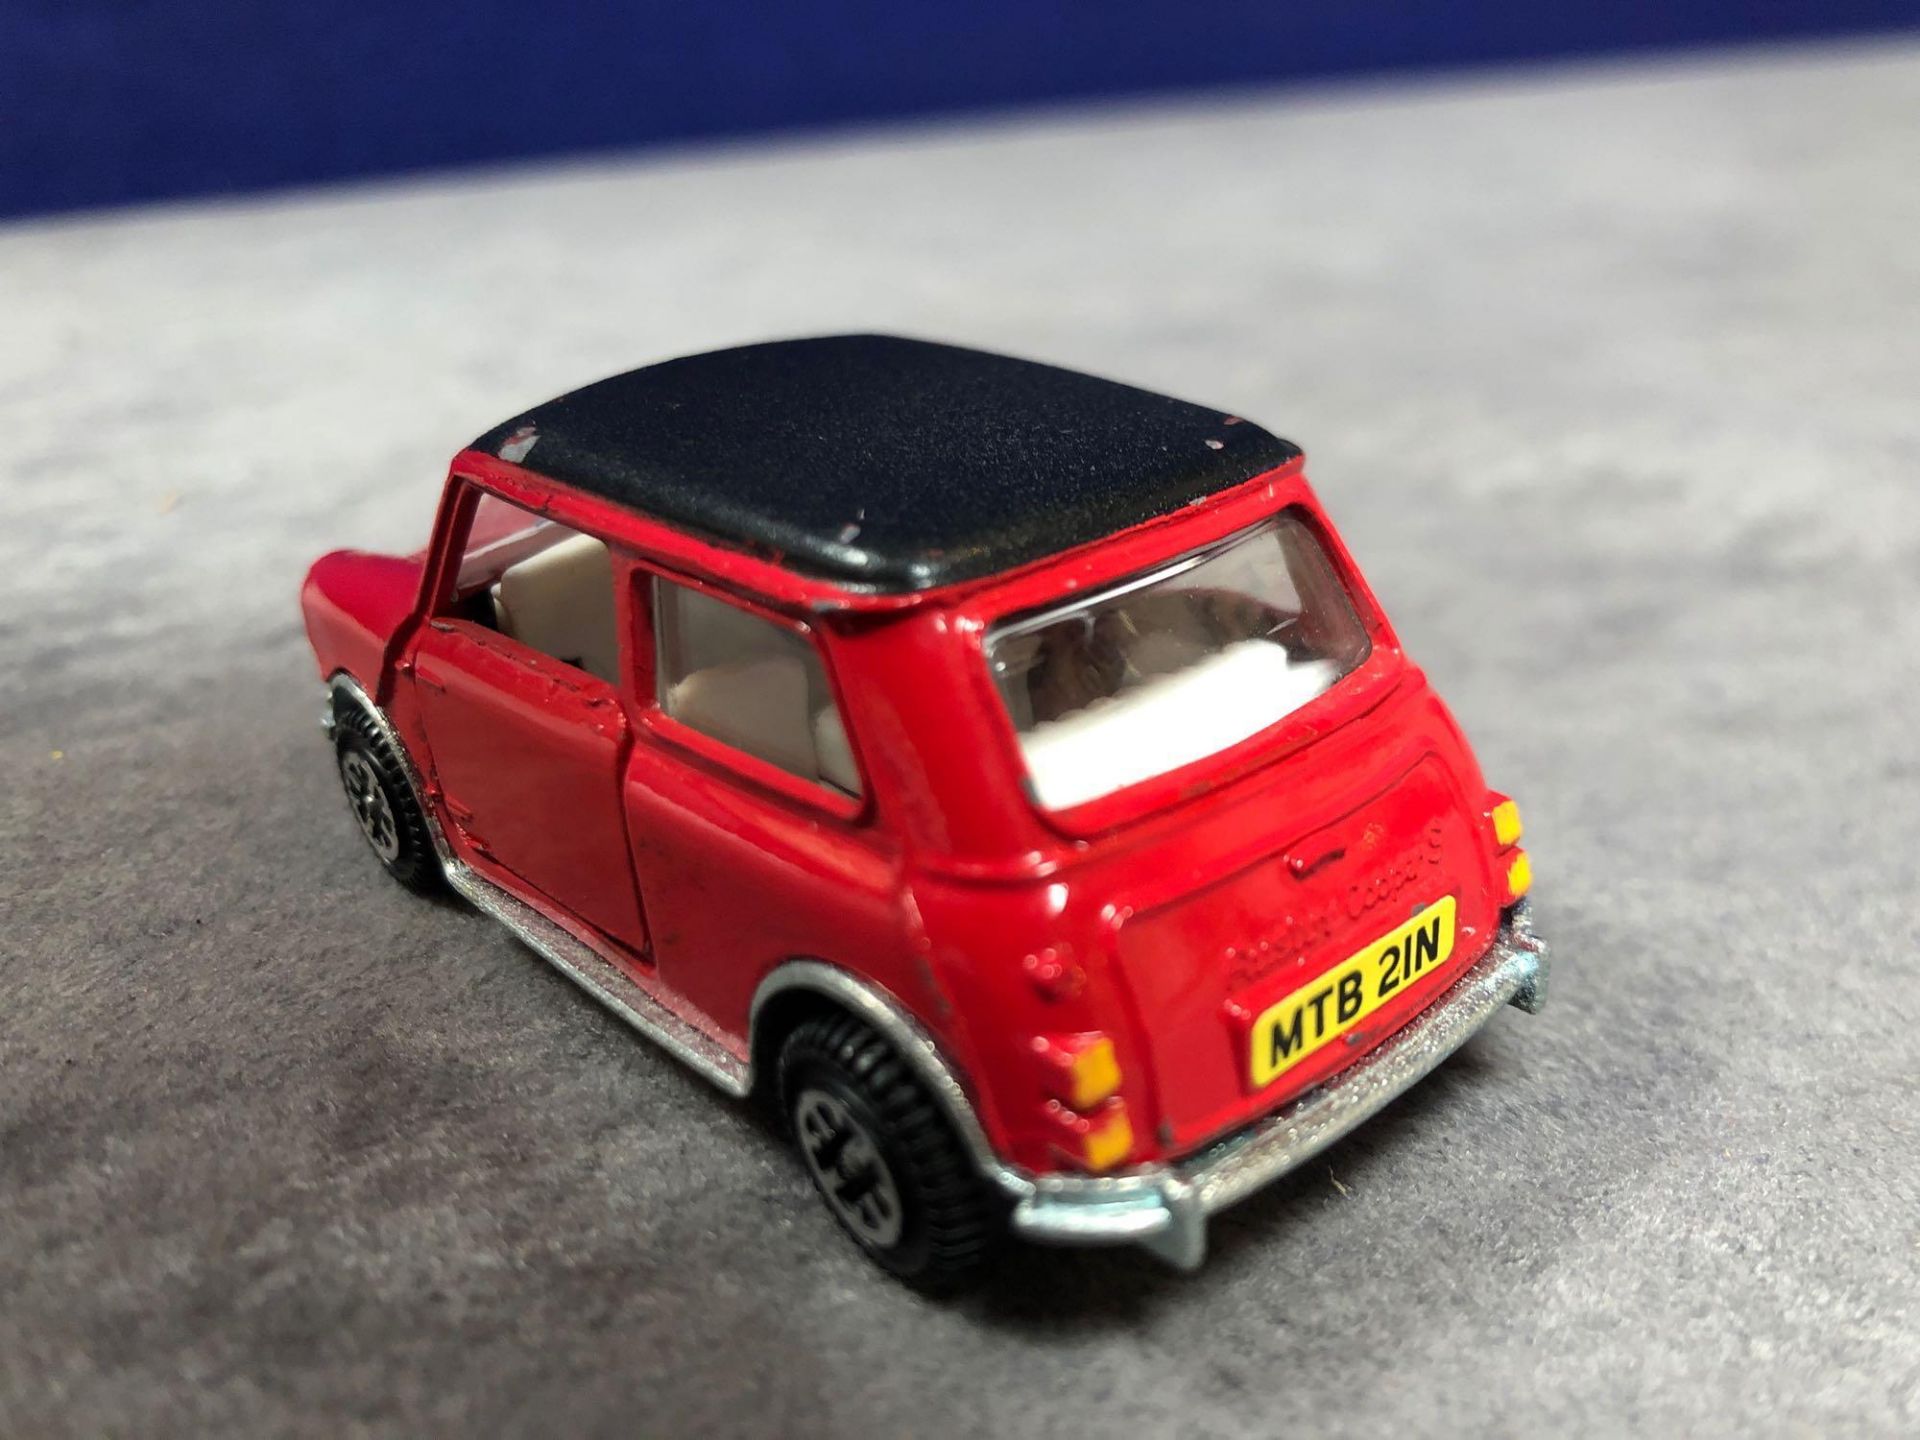 Dinky Mini In Red With A Black And White Interior Unboxed Nr Mint Roof Marked Has A Good Shine - Image 3 of 4